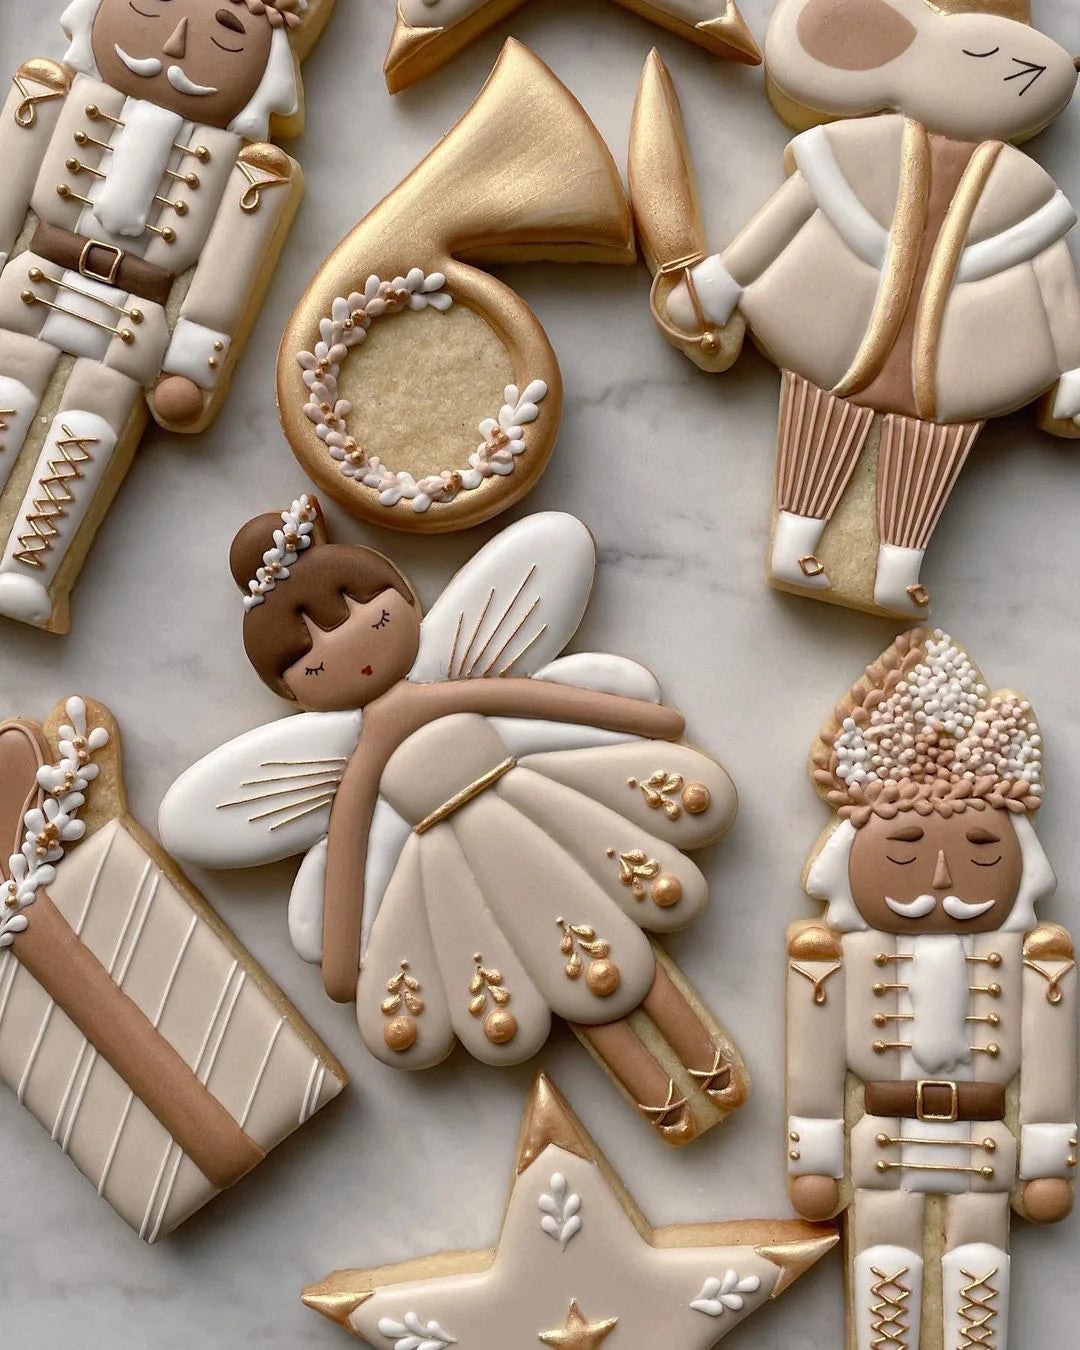 STL - The Nutcracker by The Cookie Gallery